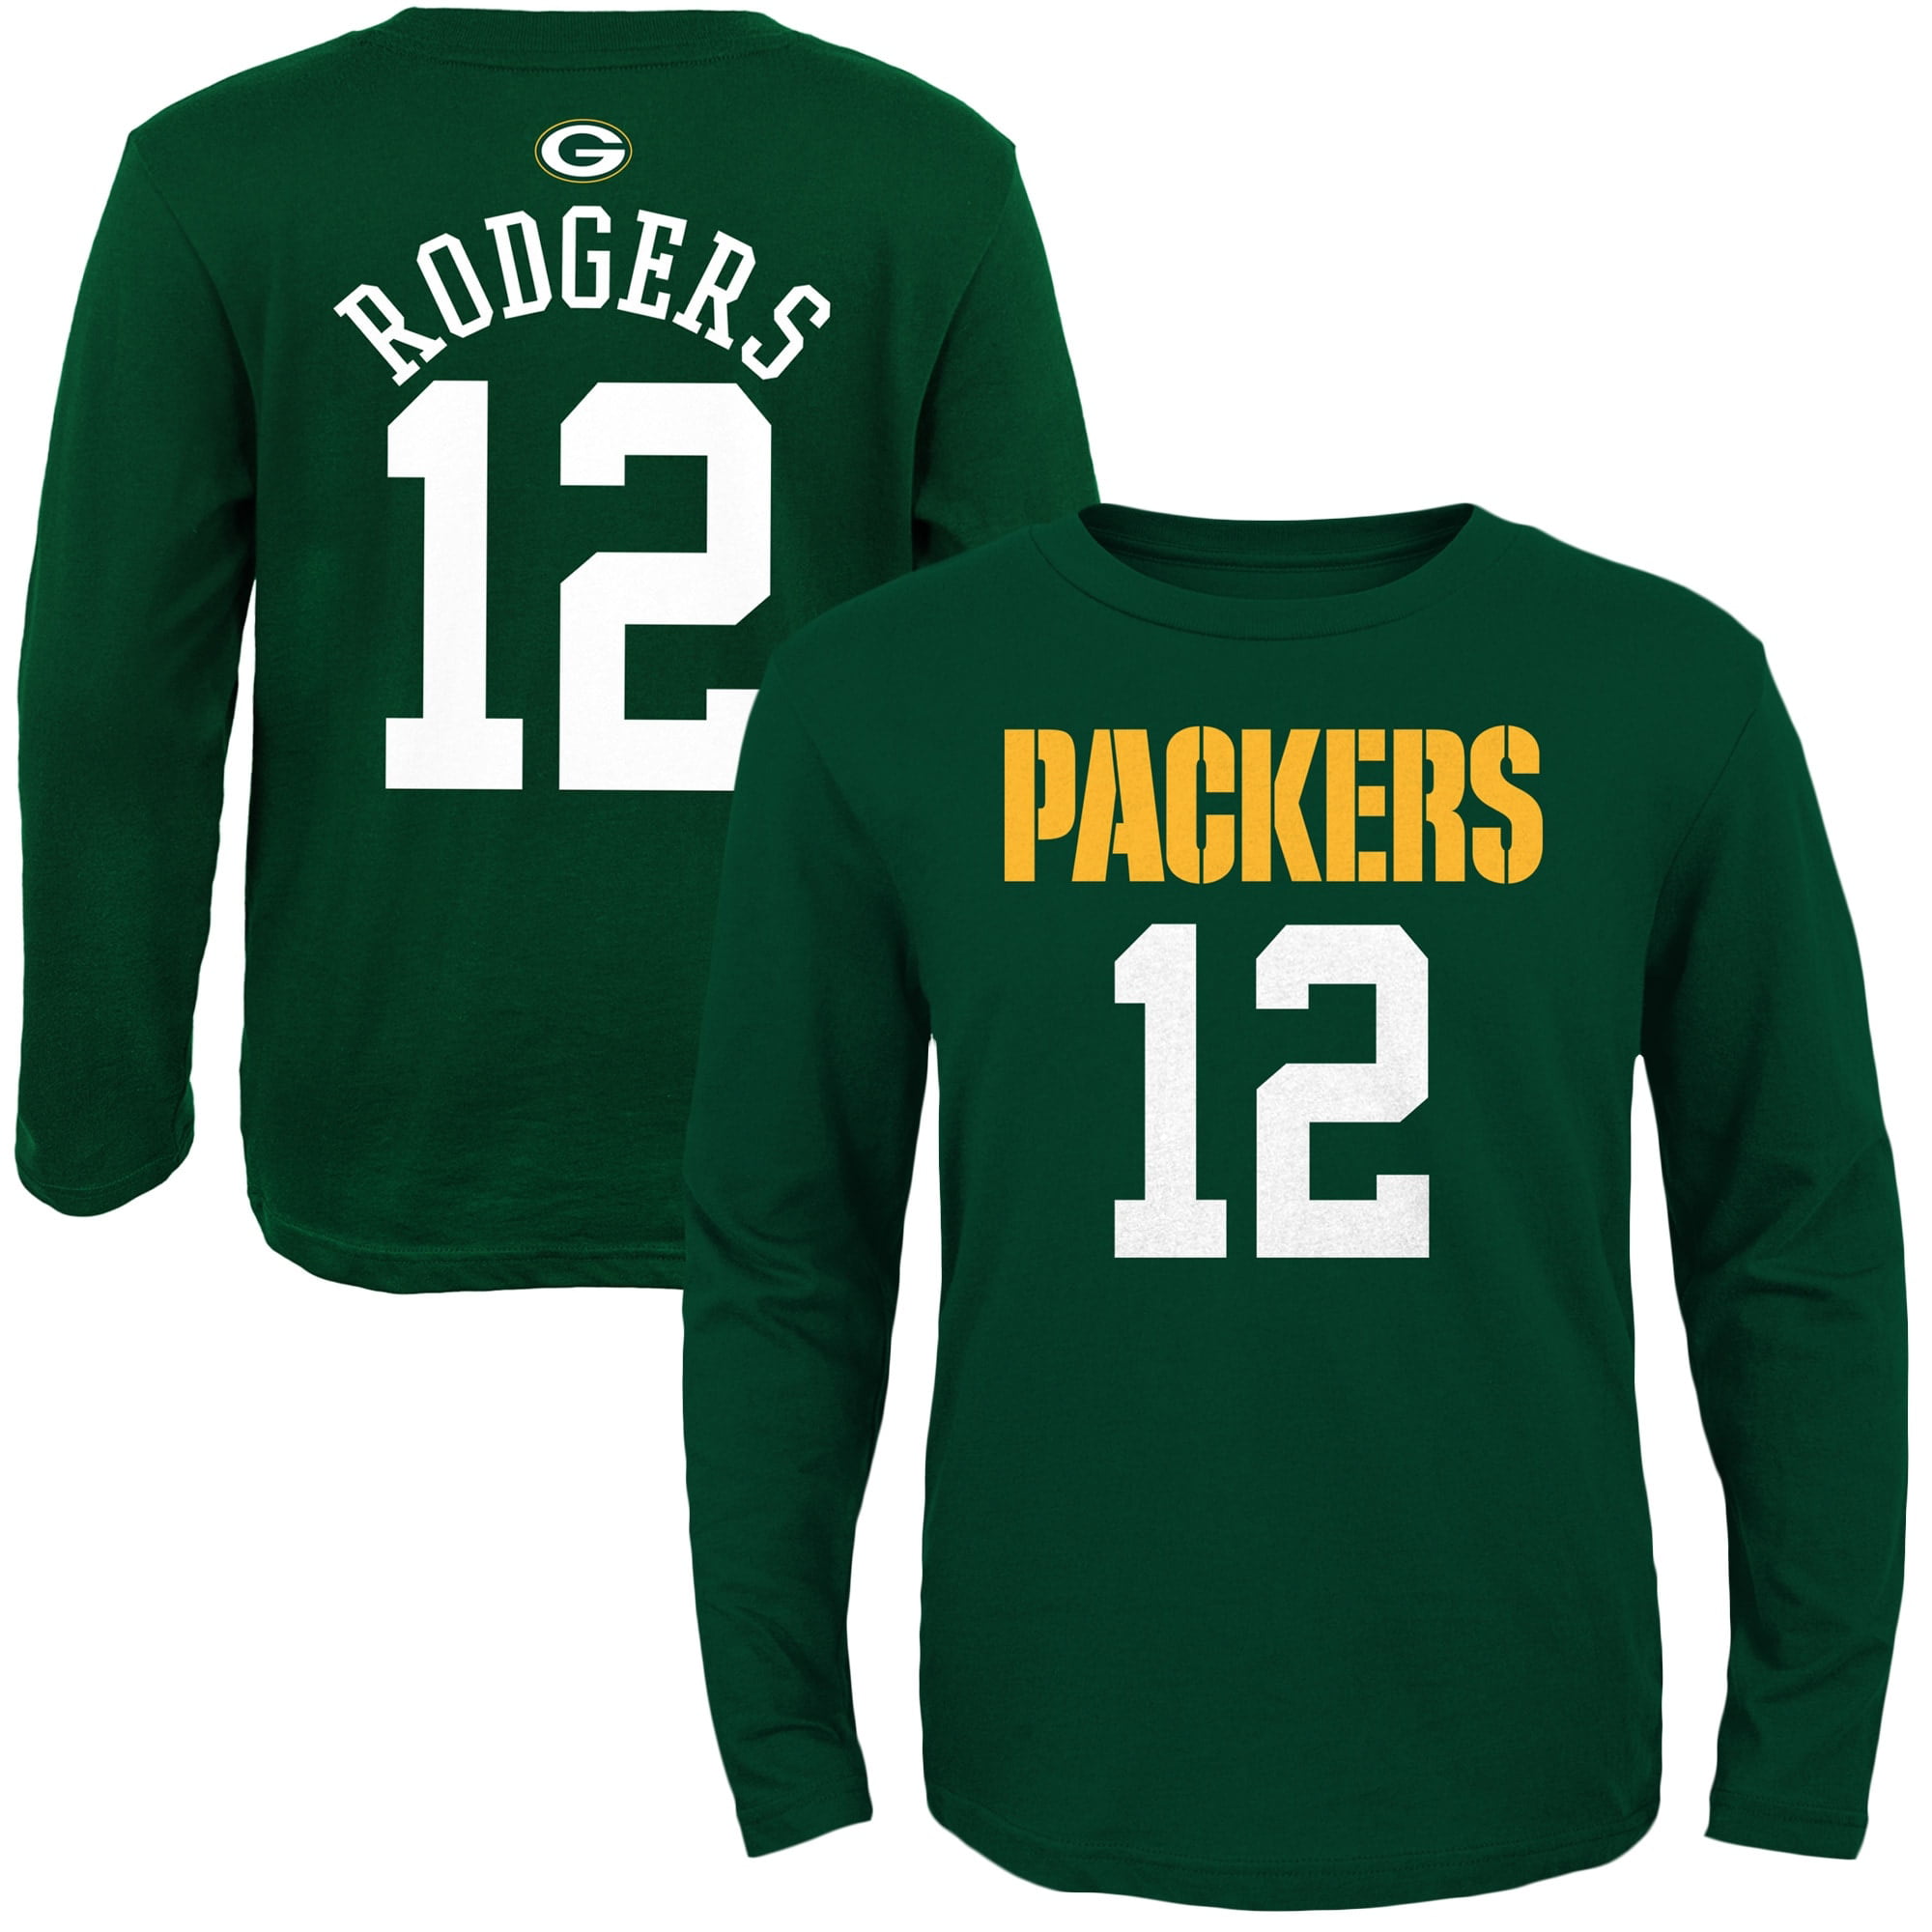 Outerstuff Aaron Rodgers Green Bay Packers Toddler Green Jersey 